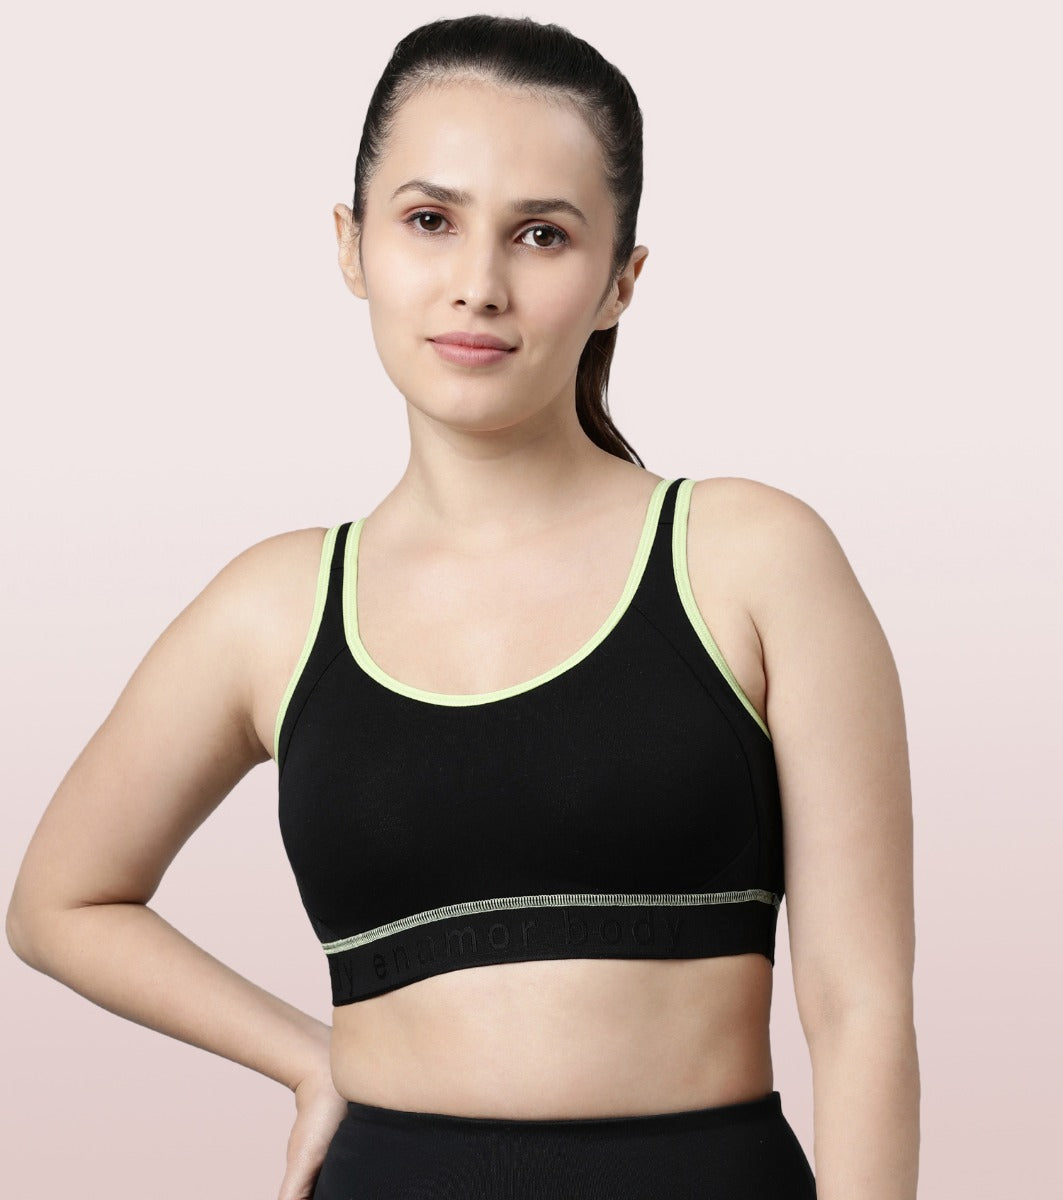 Enamor Agion SB28 Antimicrobial Side Shaper Active Sports Bra for Women - Non Padded, Wirefree and High Coverage - Black